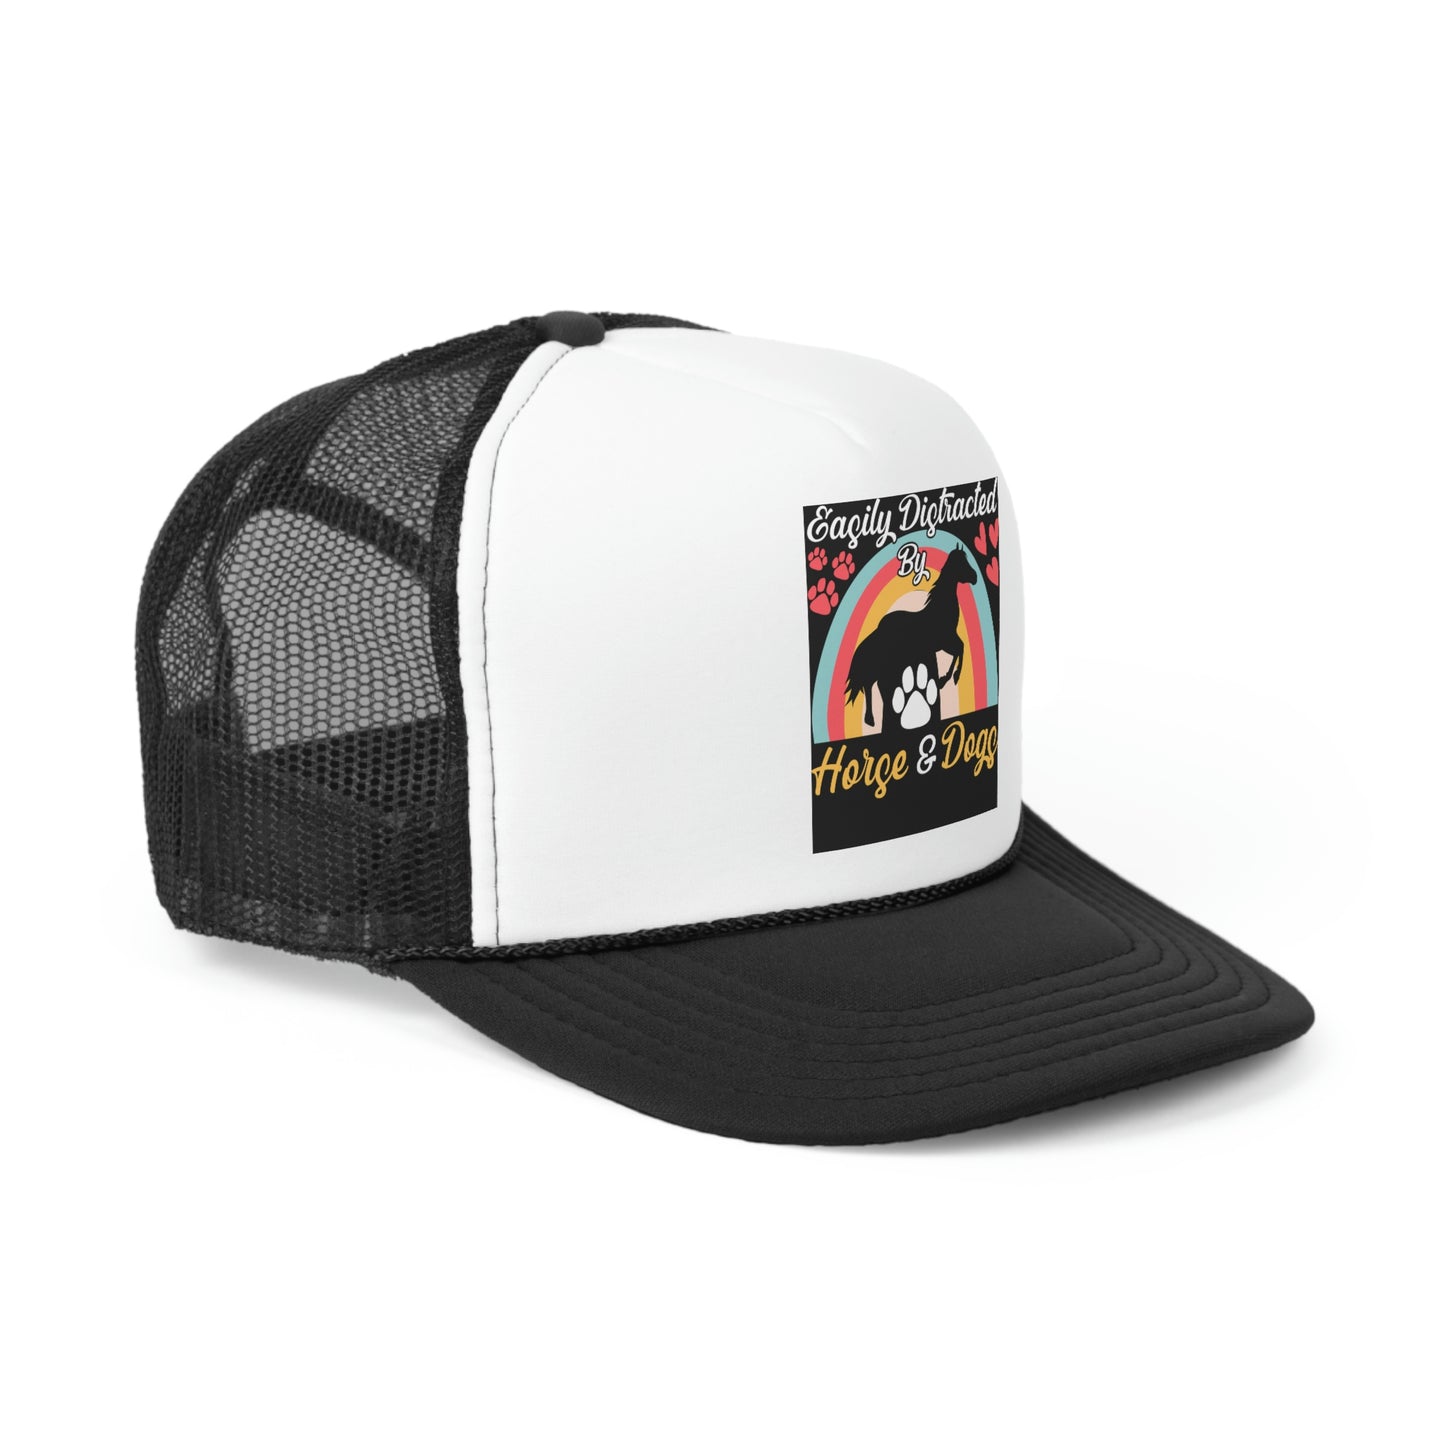 Easily Distracted by Horse and Dogs Trucker Cap